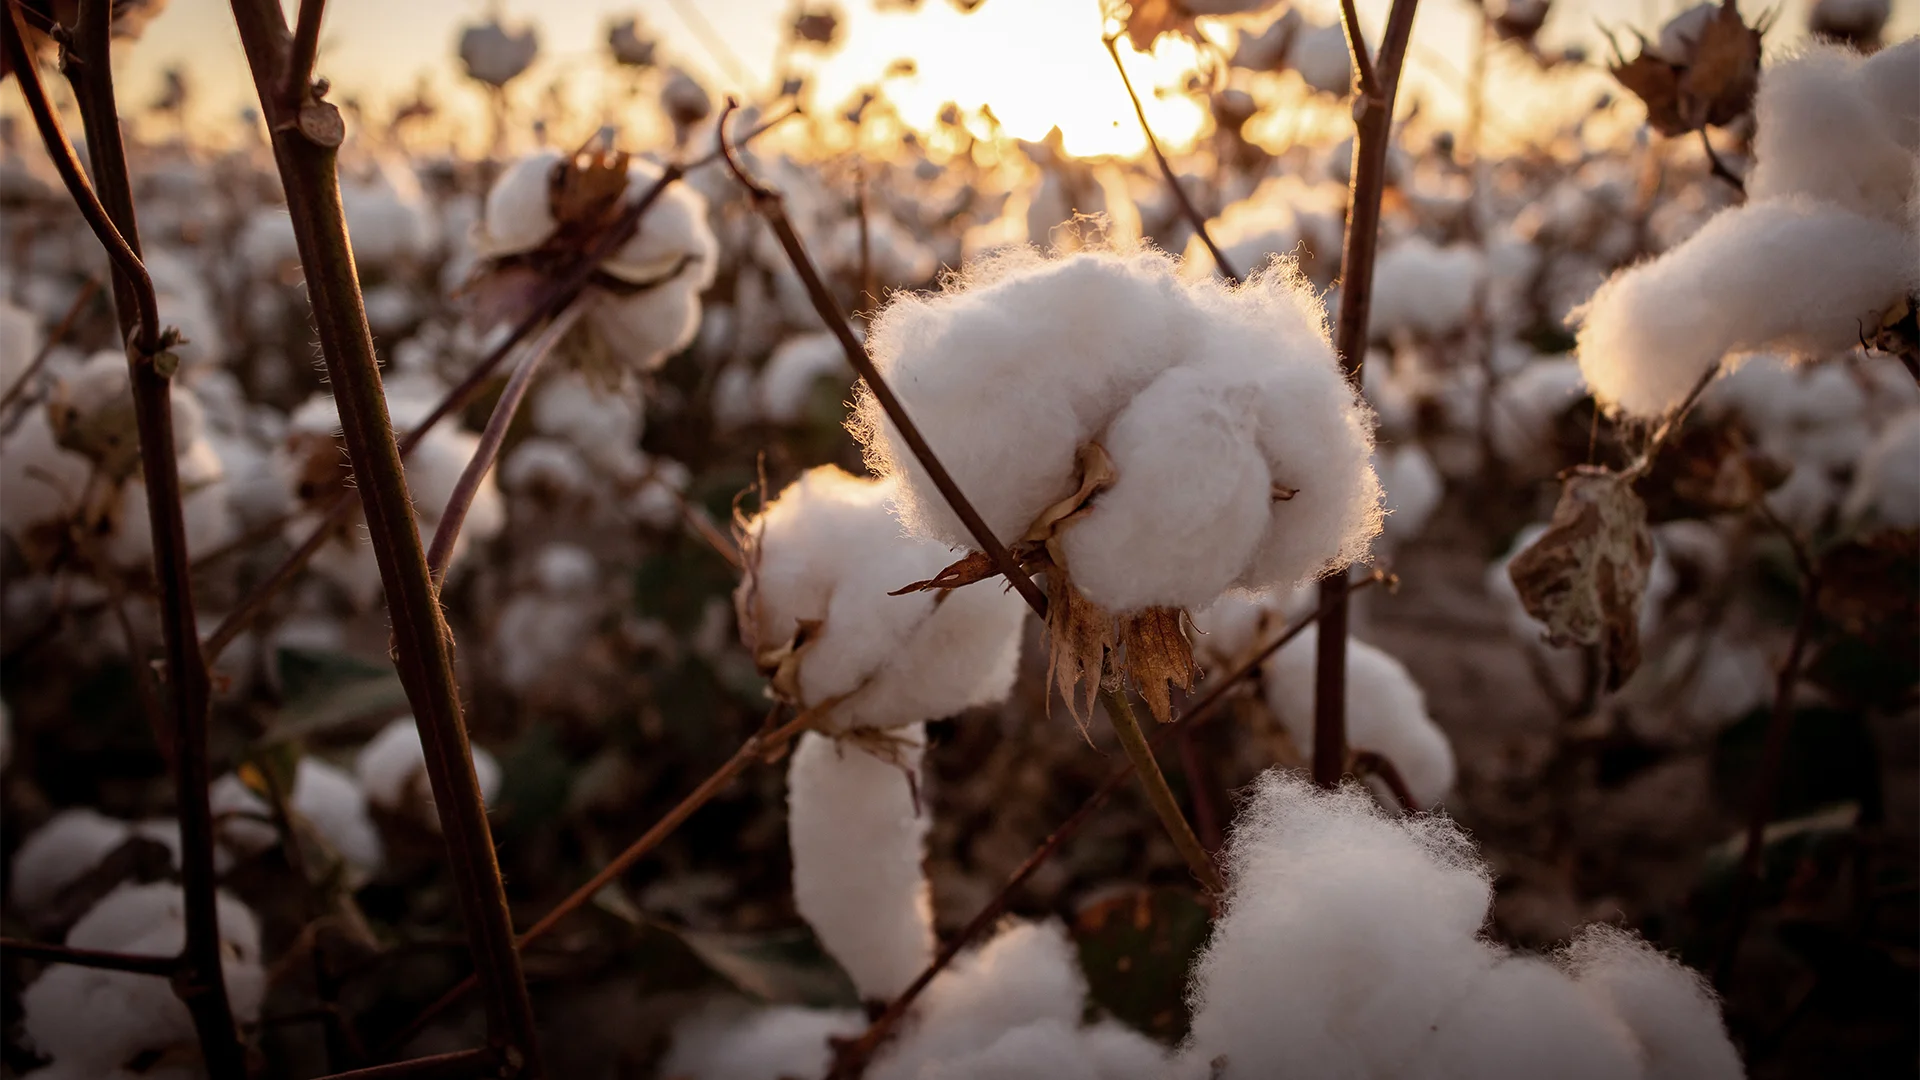 Field of cotton plants ripe for harvest at sunrise (Photo)